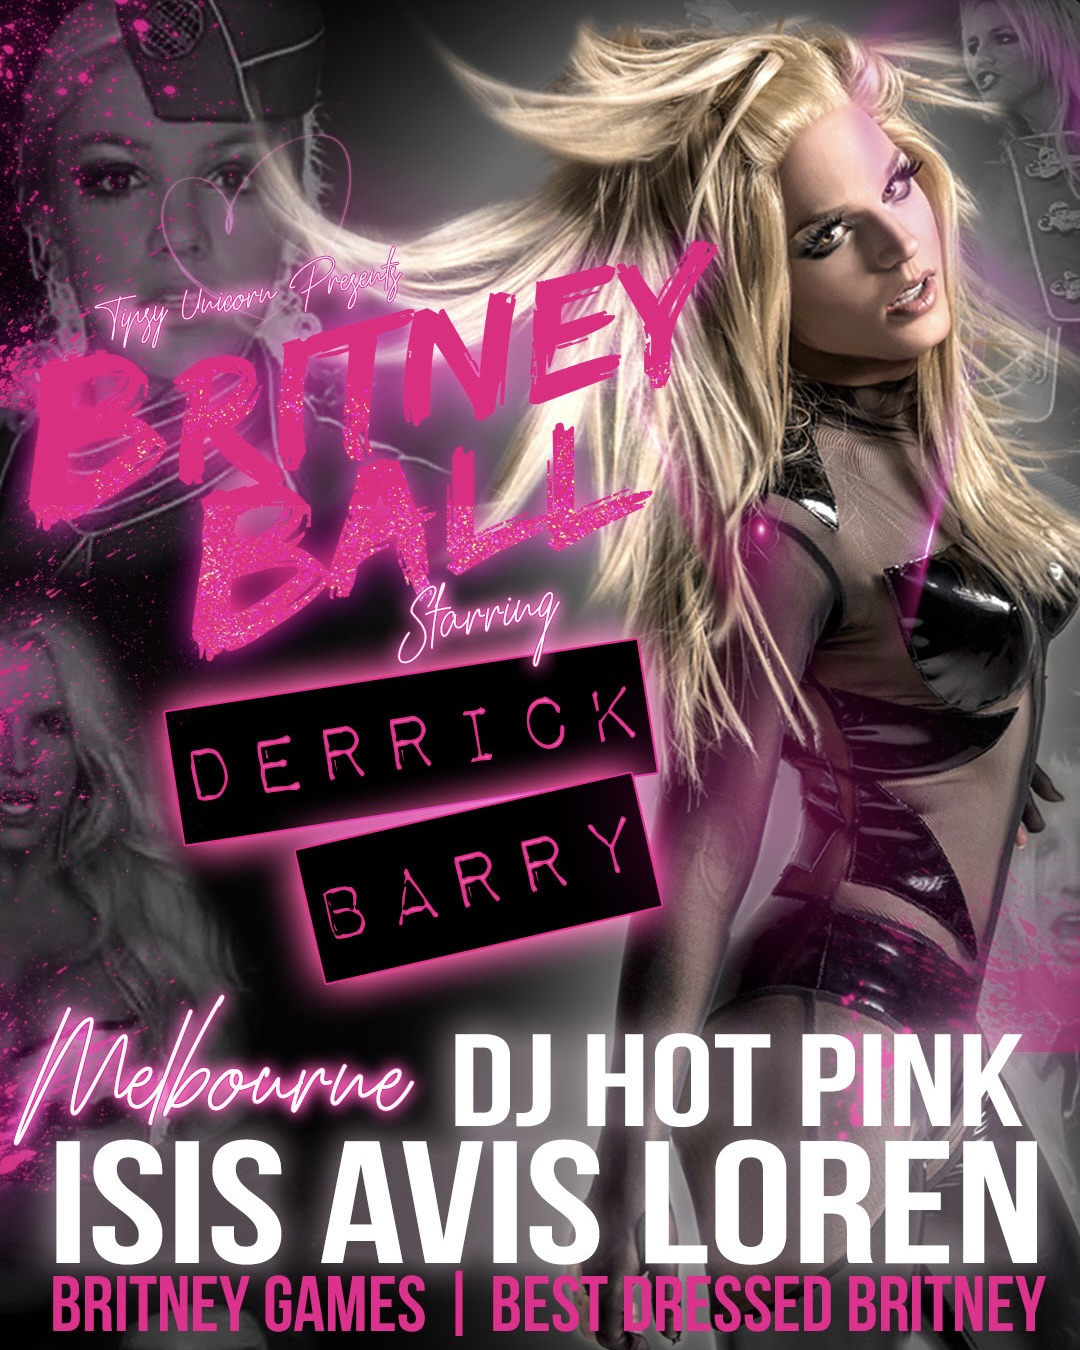 Poster for 'Britney Ball' starring Derrick Barry, designed with a 2000s aesthetic.